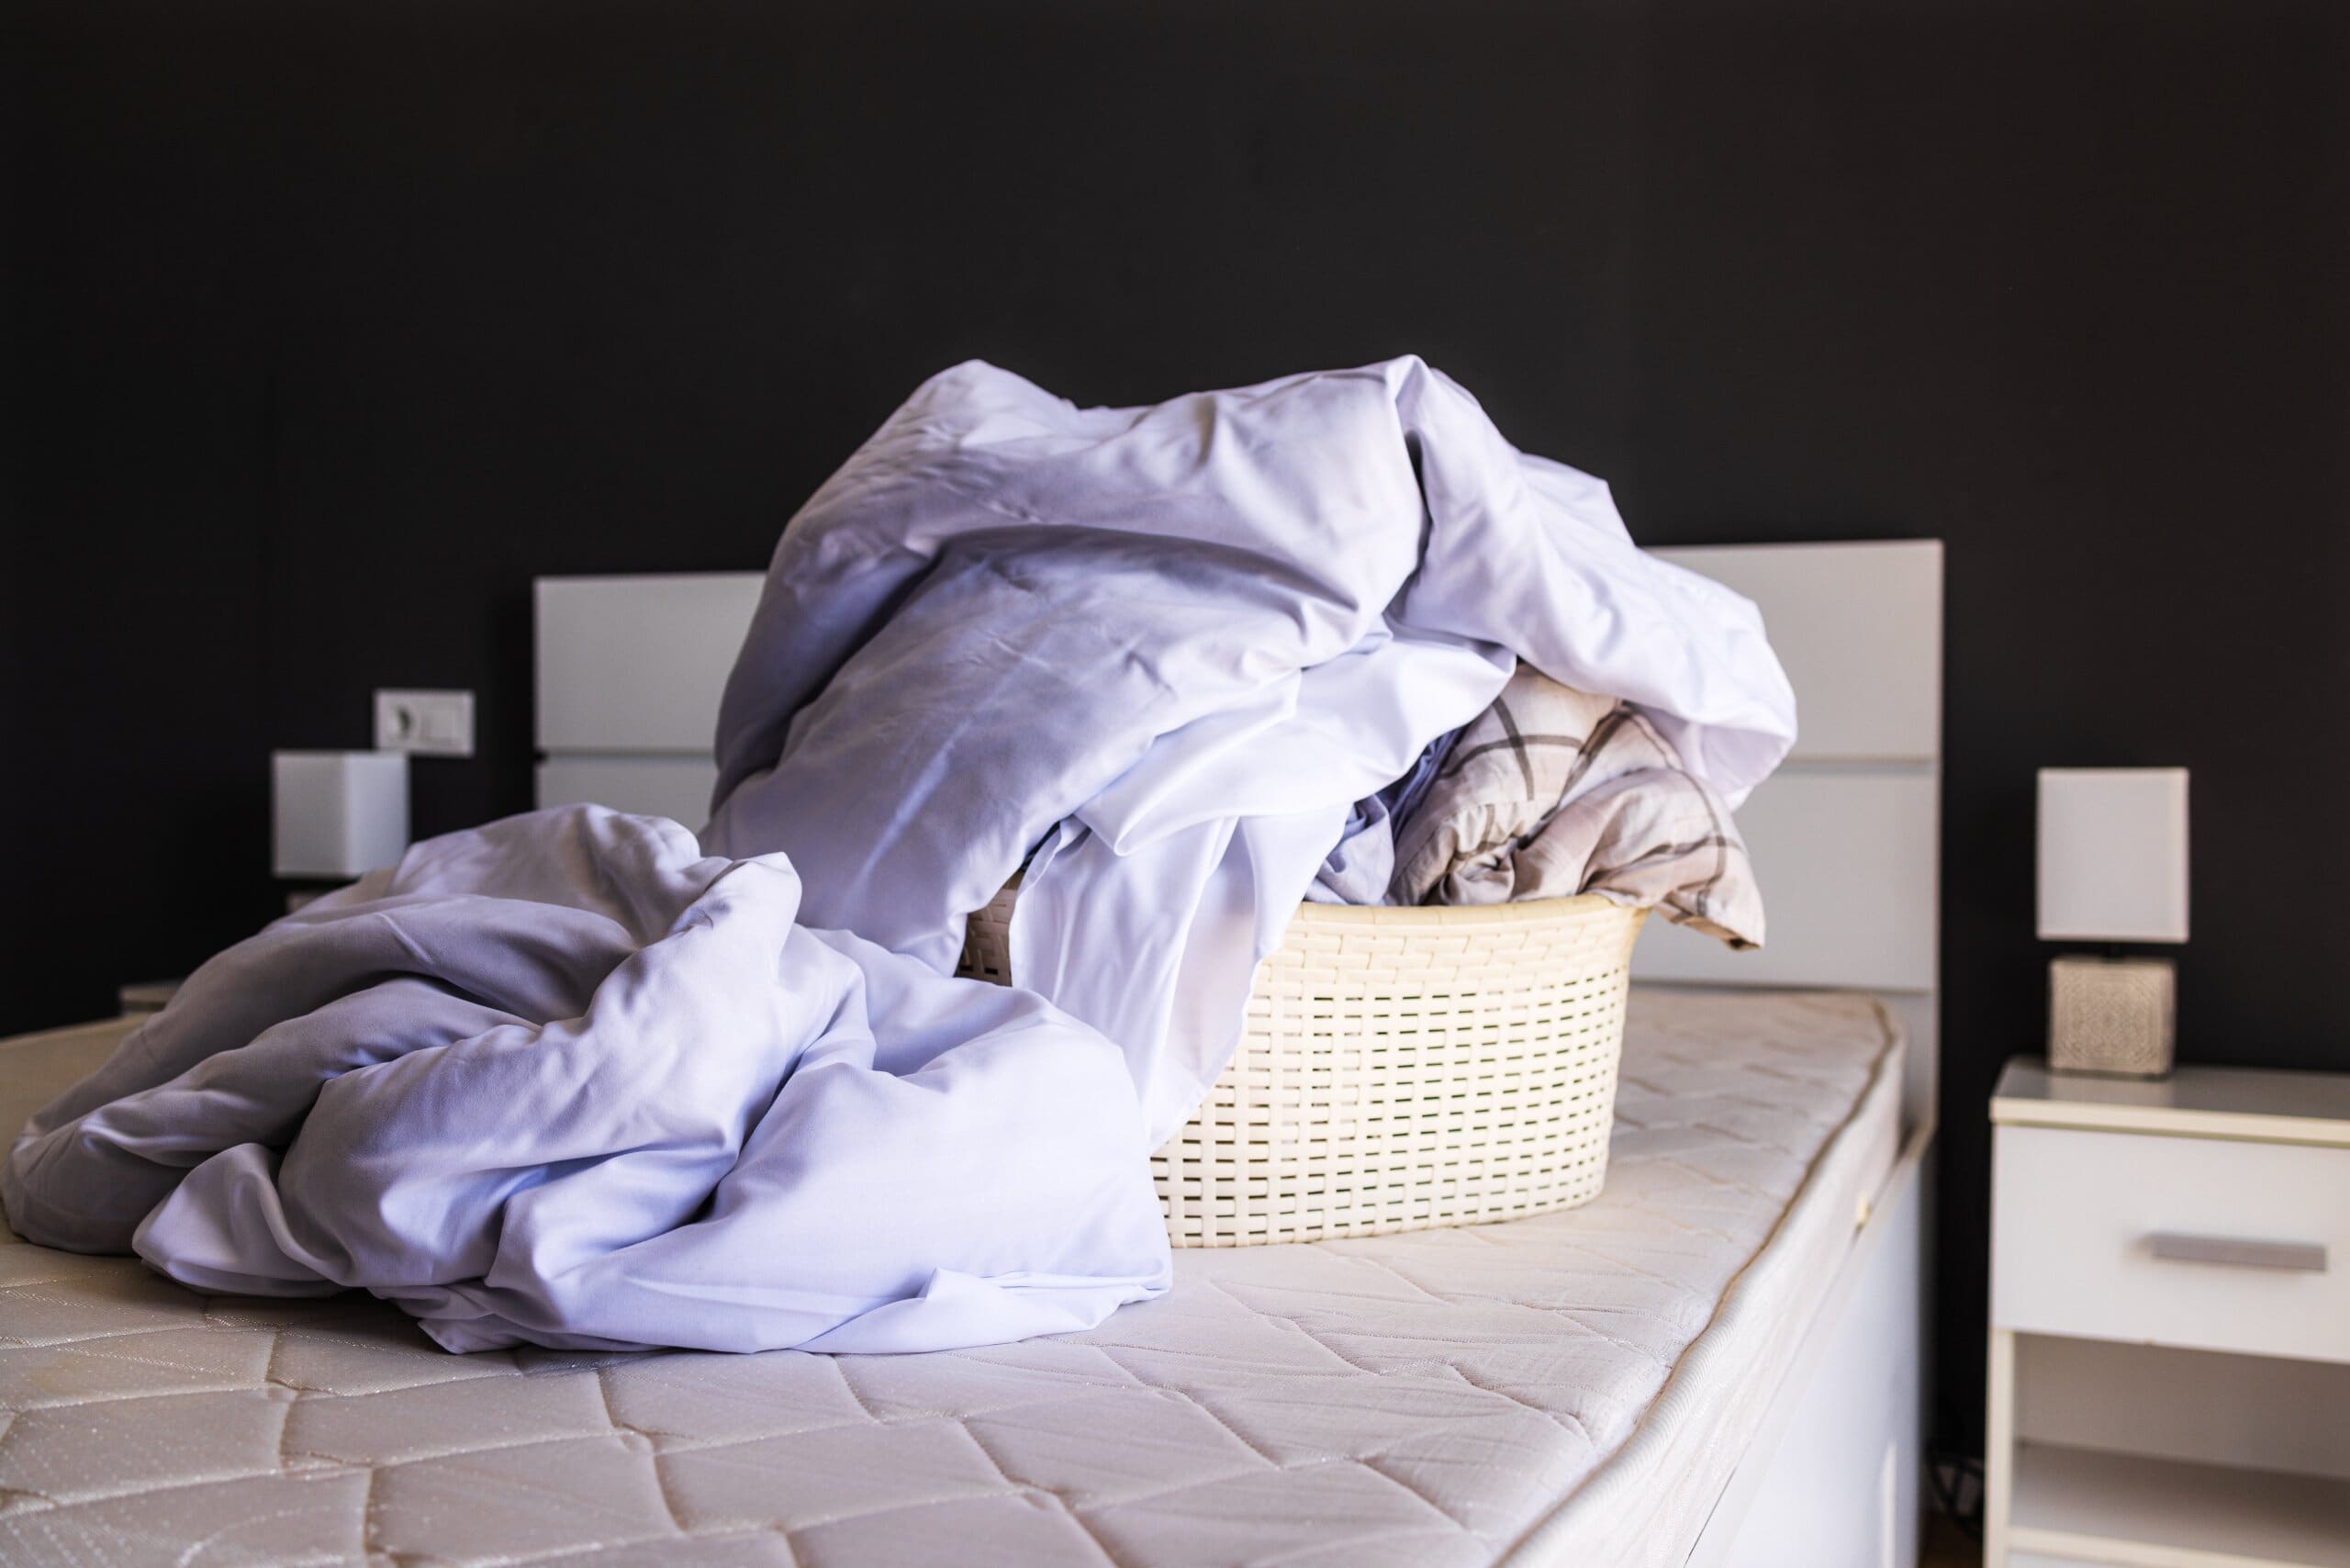 Image of an overflowing laundry basket on top of a stripped bed.